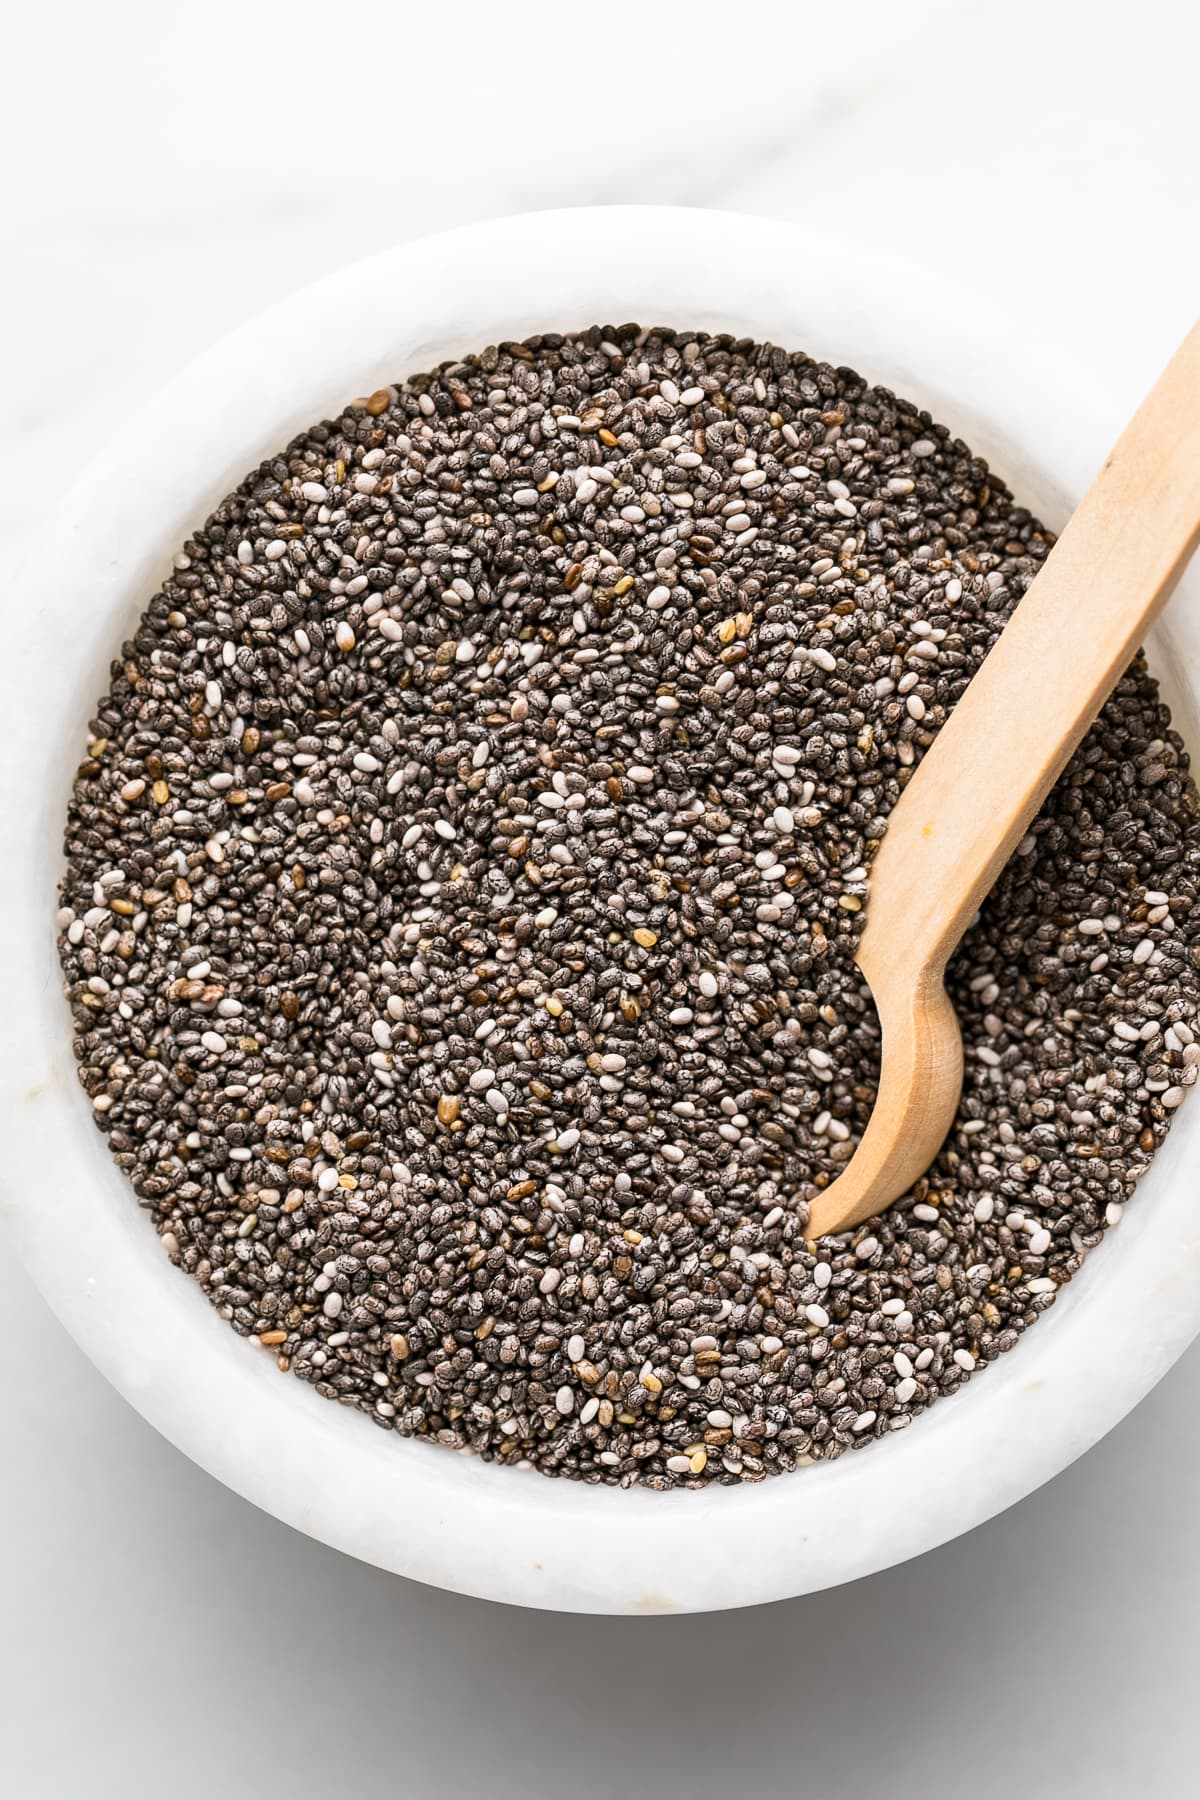 side angle view of chia seeds in a bowl with wooden spoon.